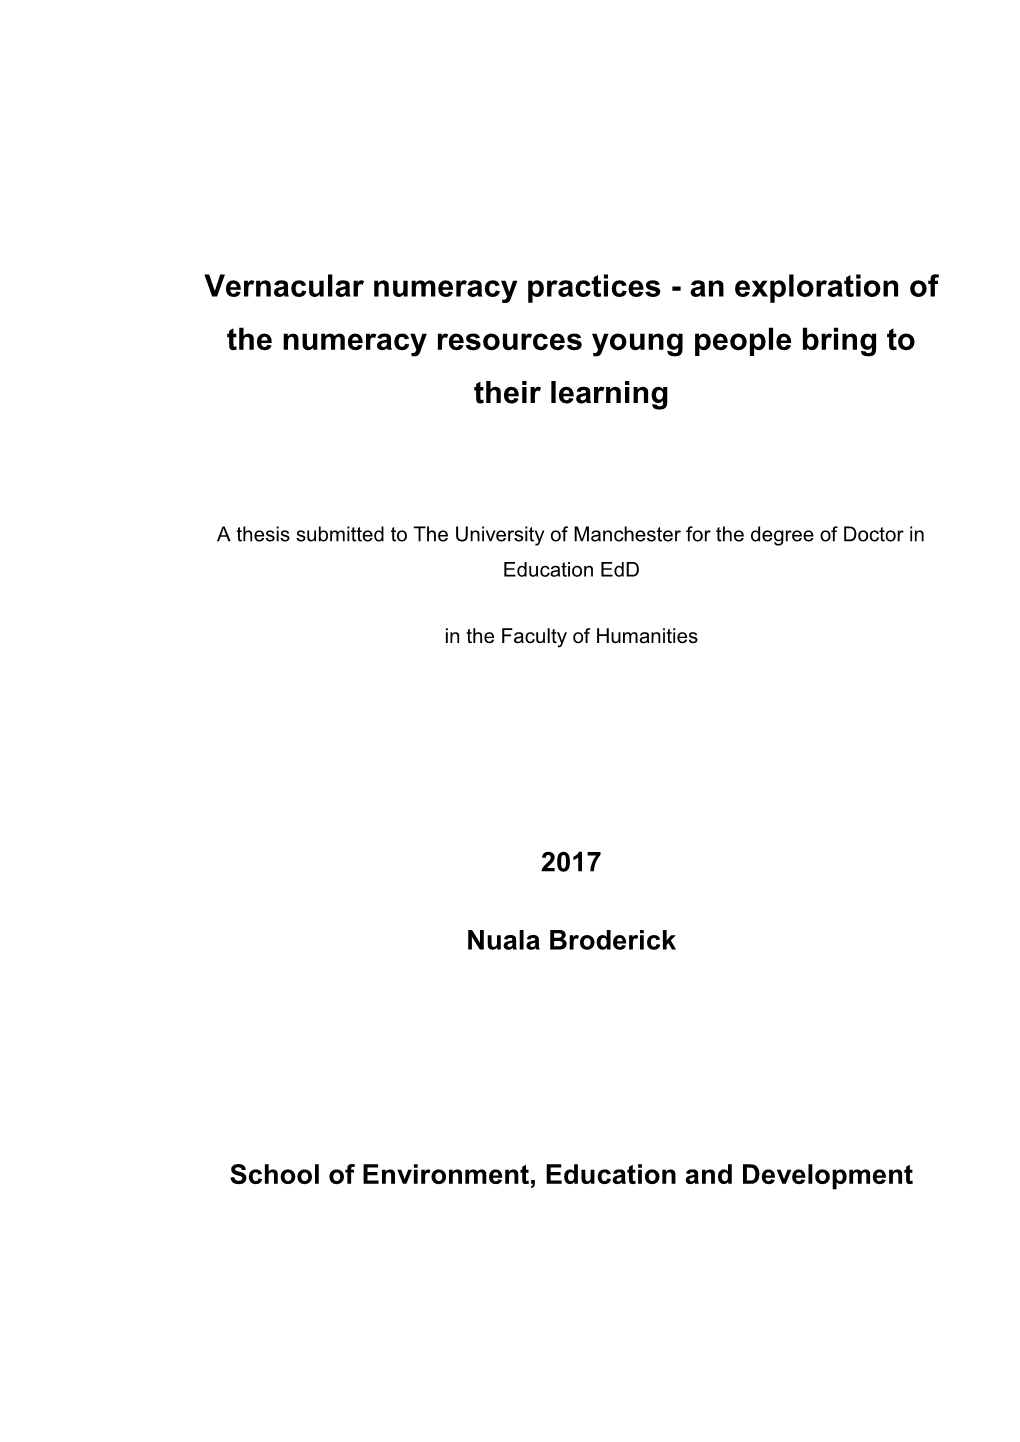 Vernacular Numeracy Practices - an Exploration of the Numeracy Resources Young People Bring to Their Learning